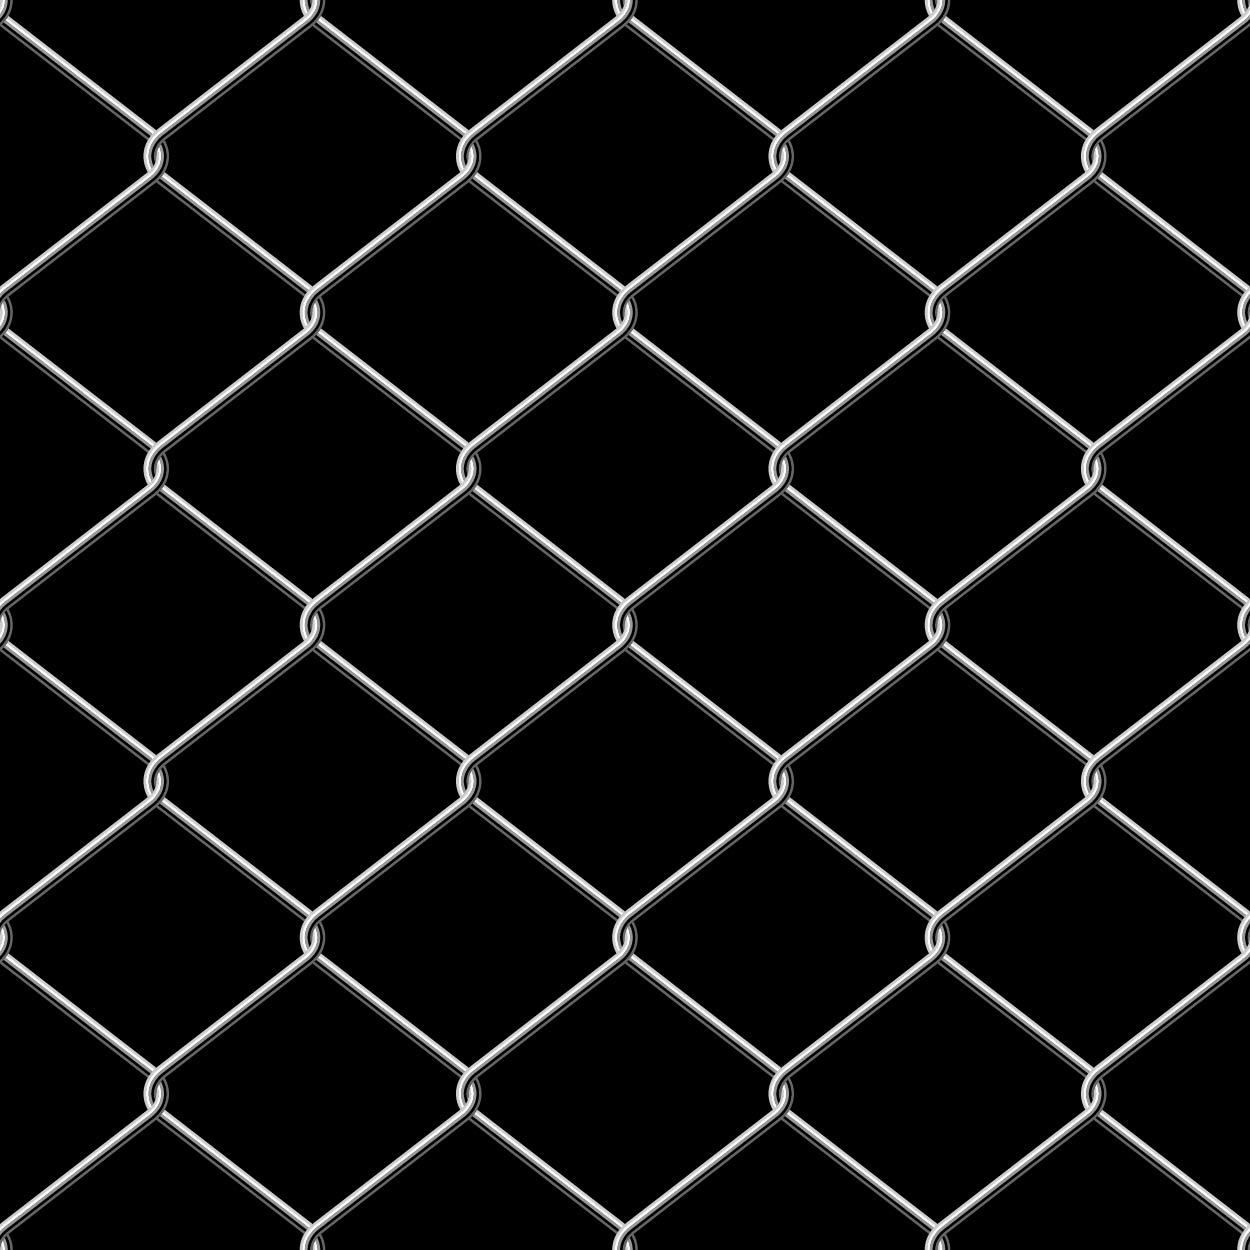 Metallic Wire Linked Fence Background